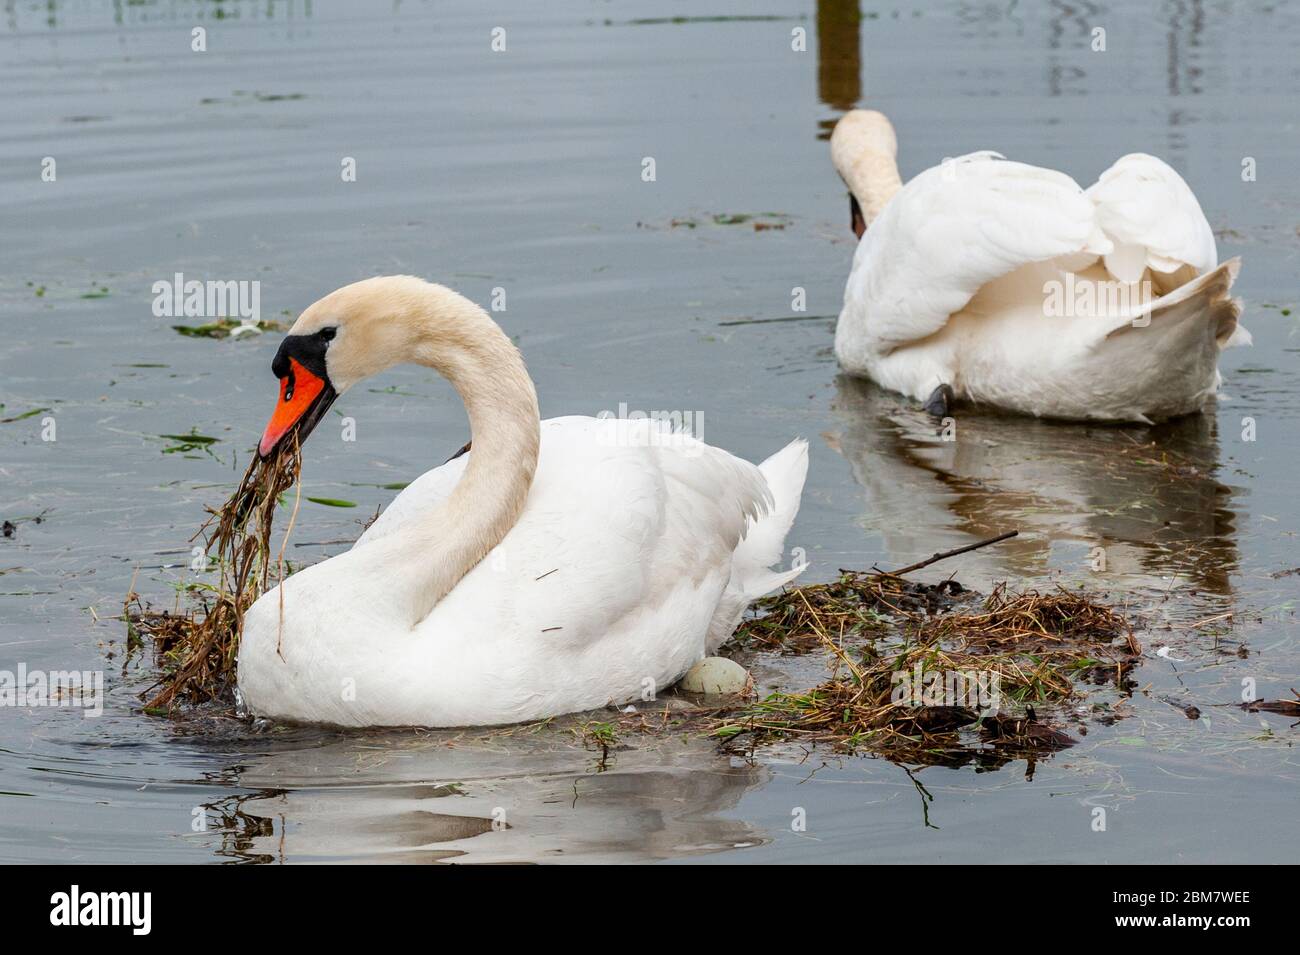 Timoleague, West Cork, Ireland. 7th May, 2020. Timoleague flooded tonight at high tide which meant the nesting swans lost their remaining egg to the water. The swans have been nesting for 5 weeks. The same swans lost their eggs last year. Credit: AG News/Alamy Live News Stock Photo